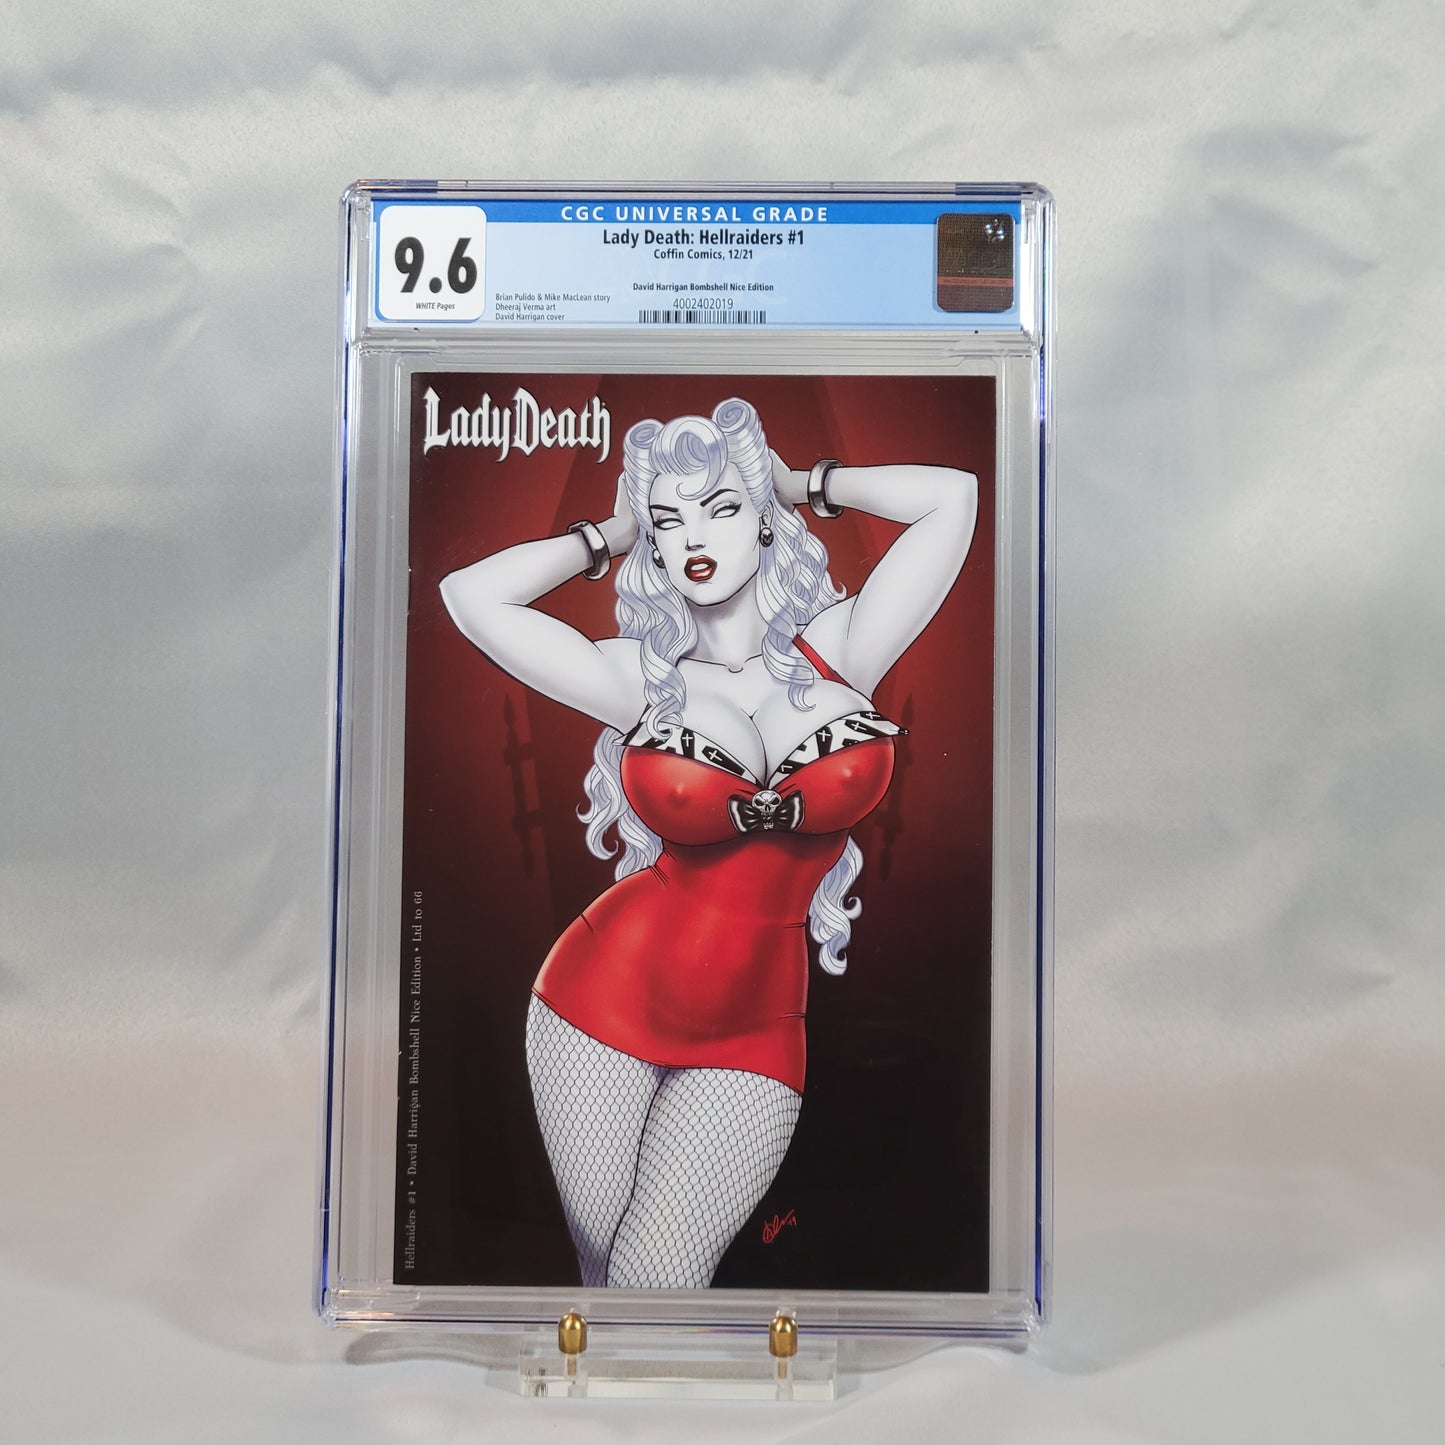 Lady Death: Hellraiders #1 "Bombshell" Naughty & Nice Collection